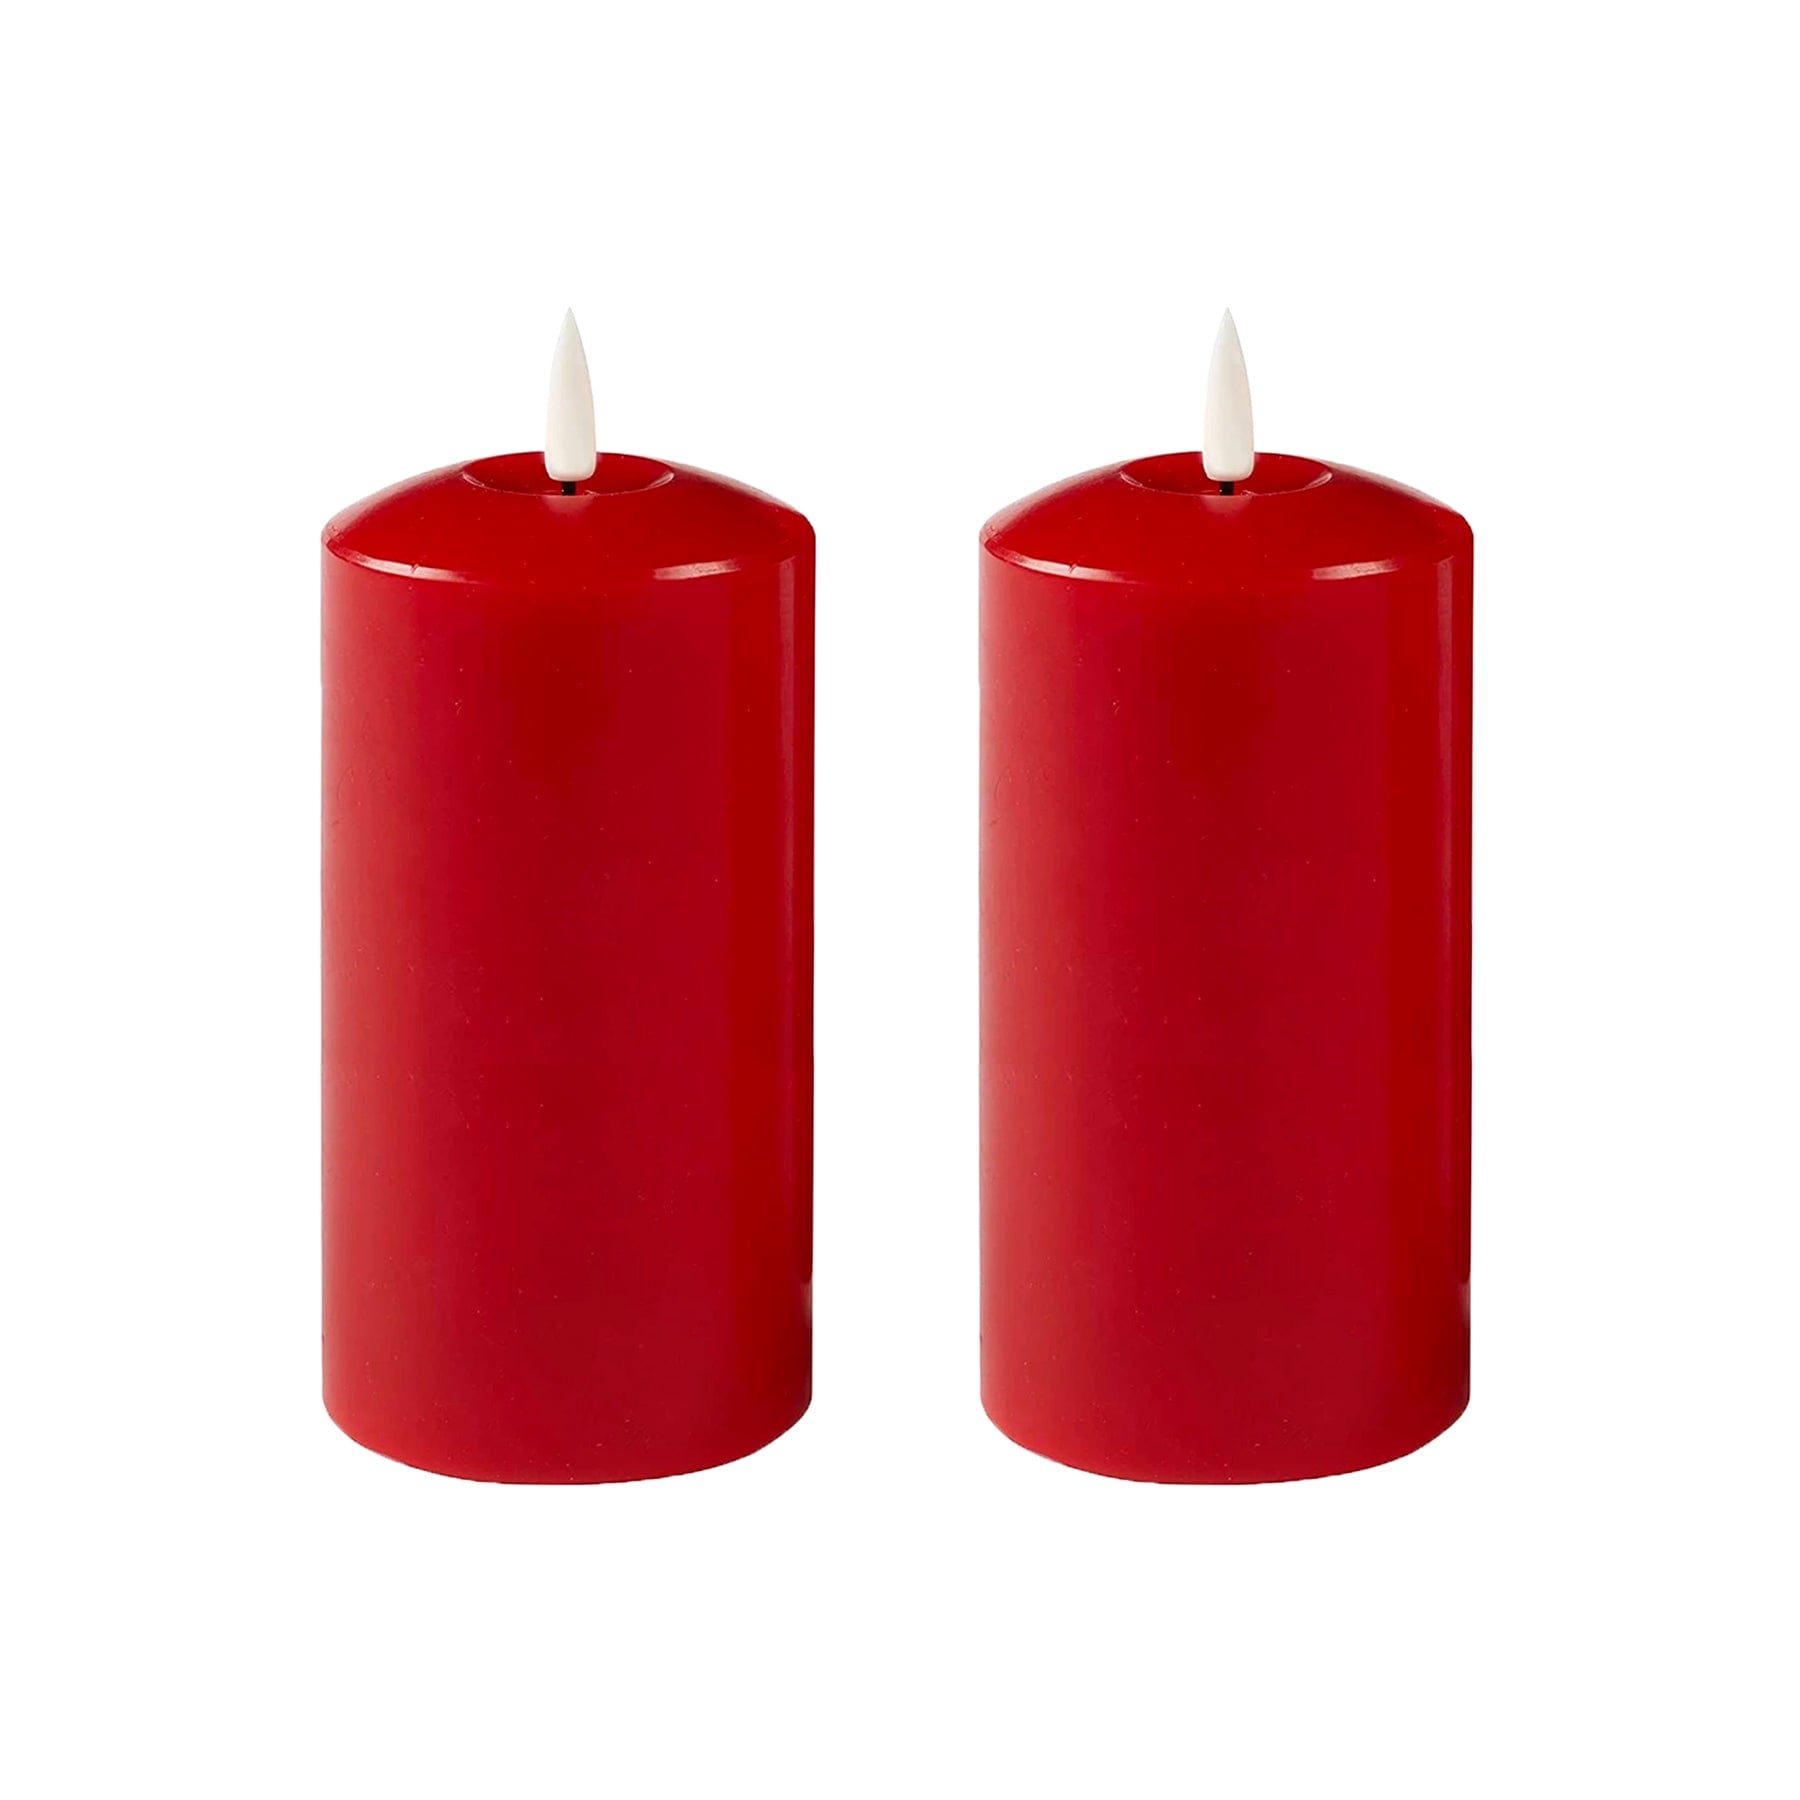 Lexi Lighting Christmas Table Decoration&Candle 23.5cm Set of 2 LED Red Wax Pillar Candles - 3 Size Options LLCA03R